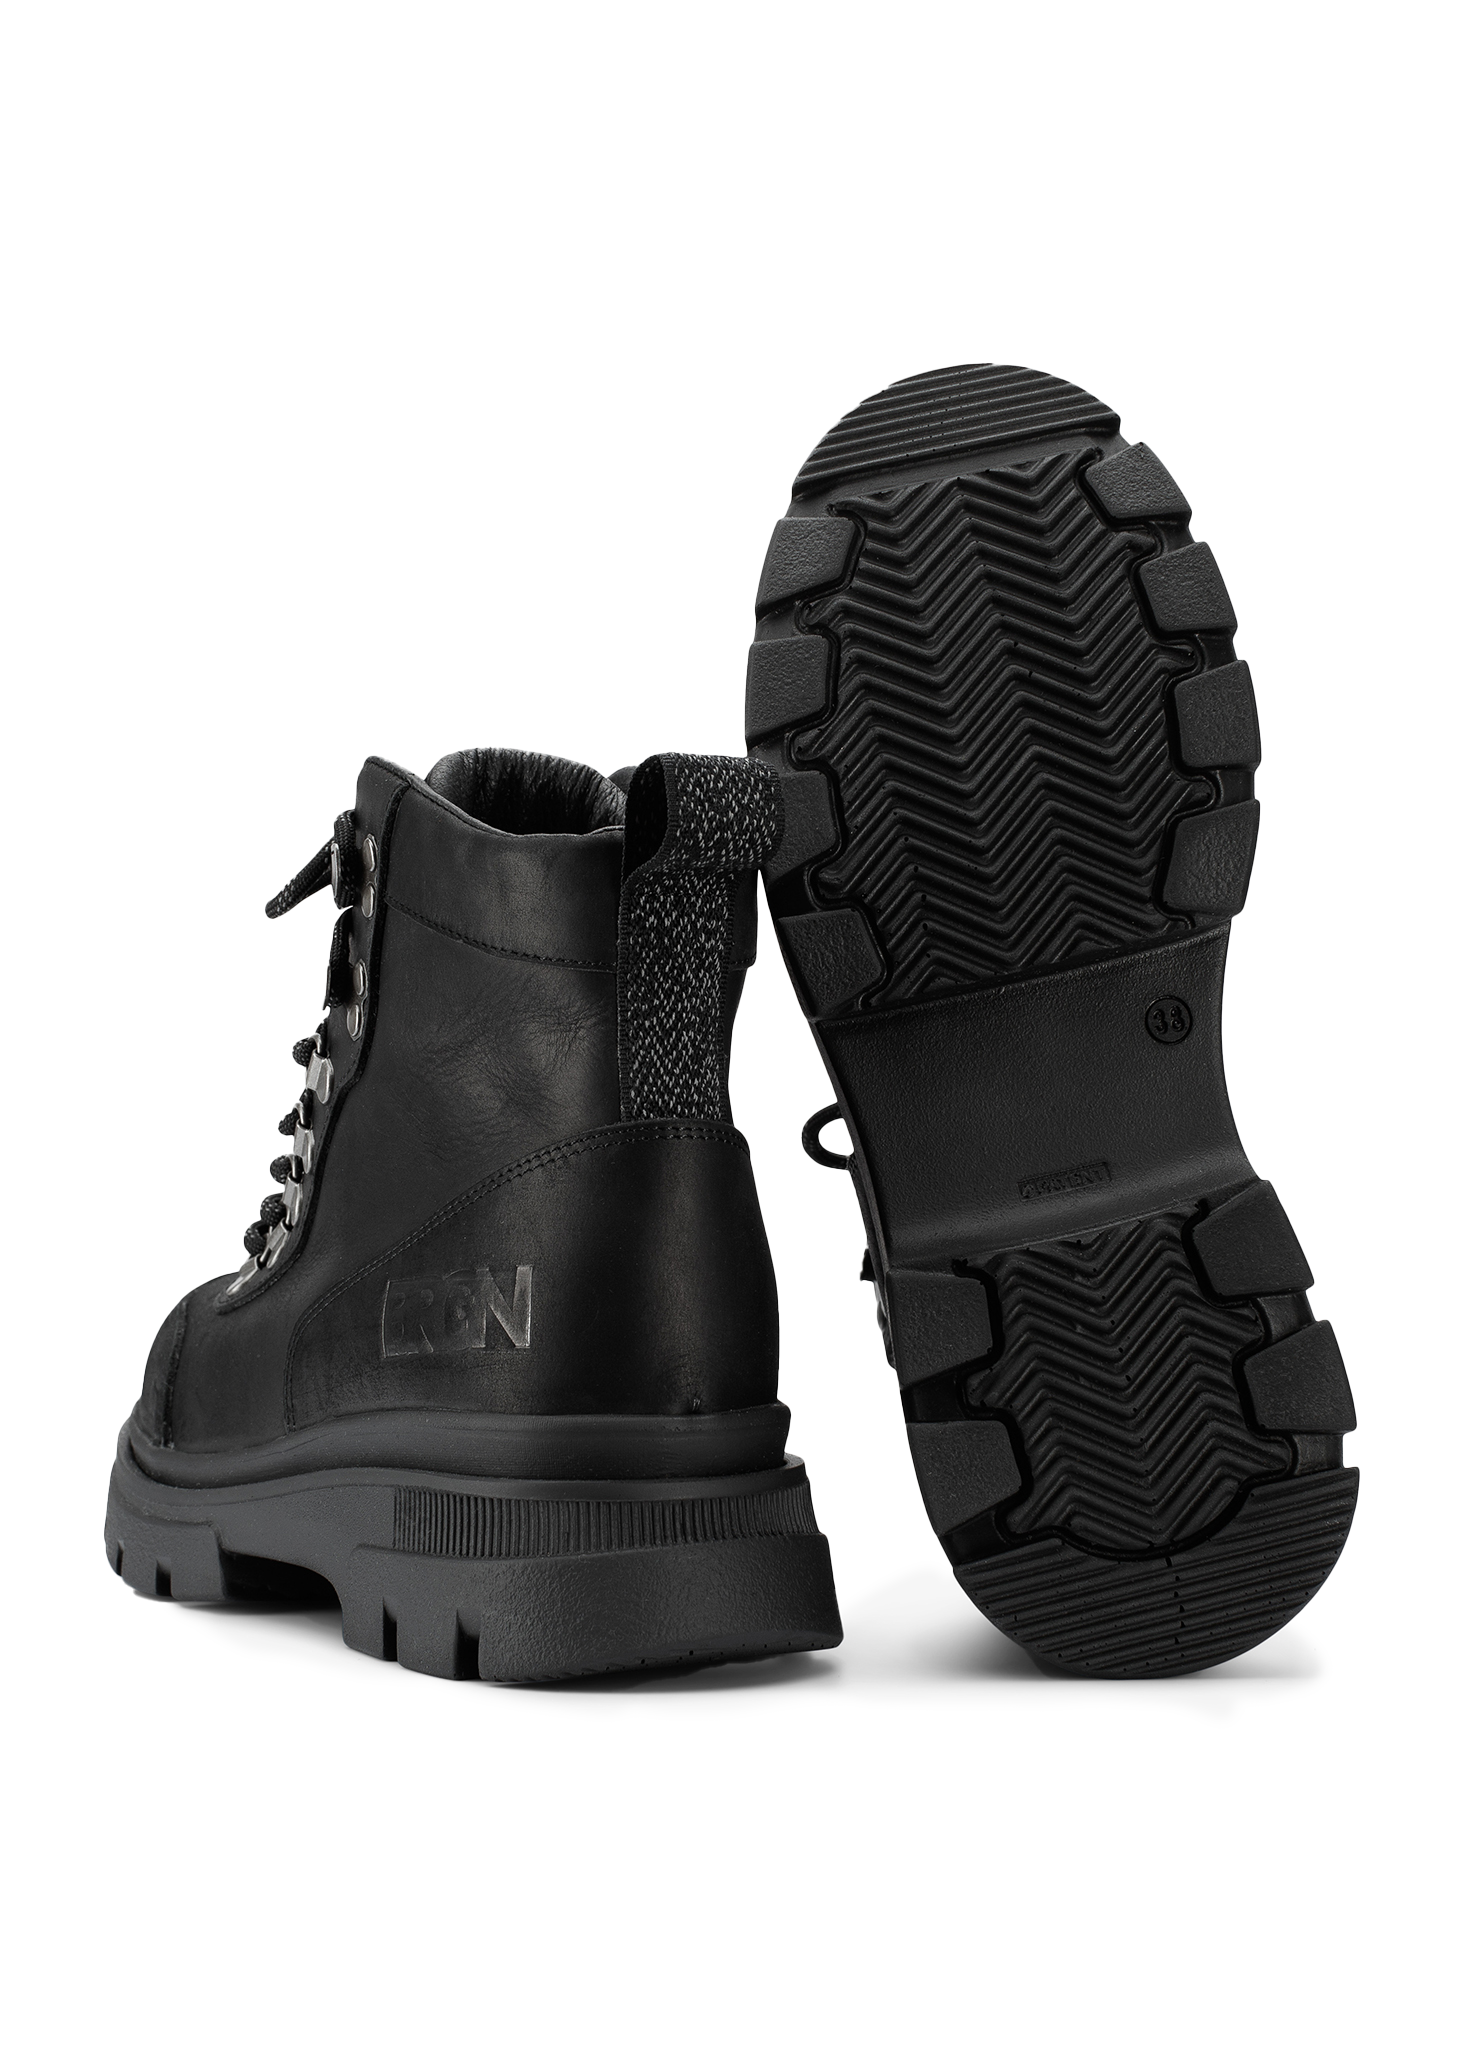 BRGN Hiking Boots Shoes 095 New Black